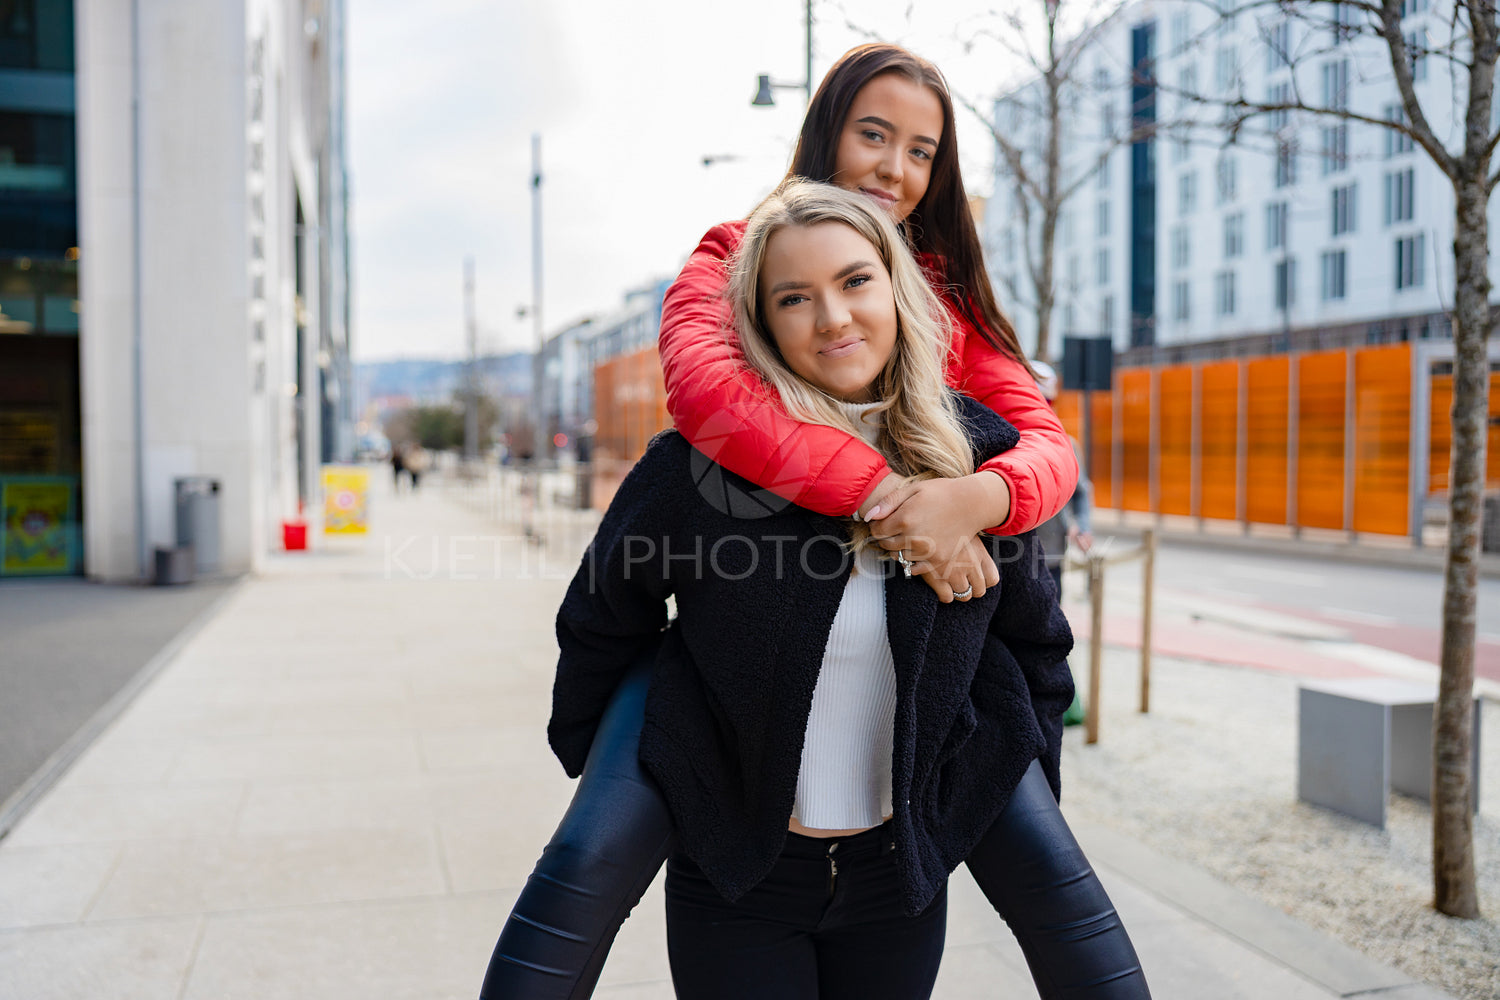 Smiling Female Friends Having Fun and Piggybacking In City Environment